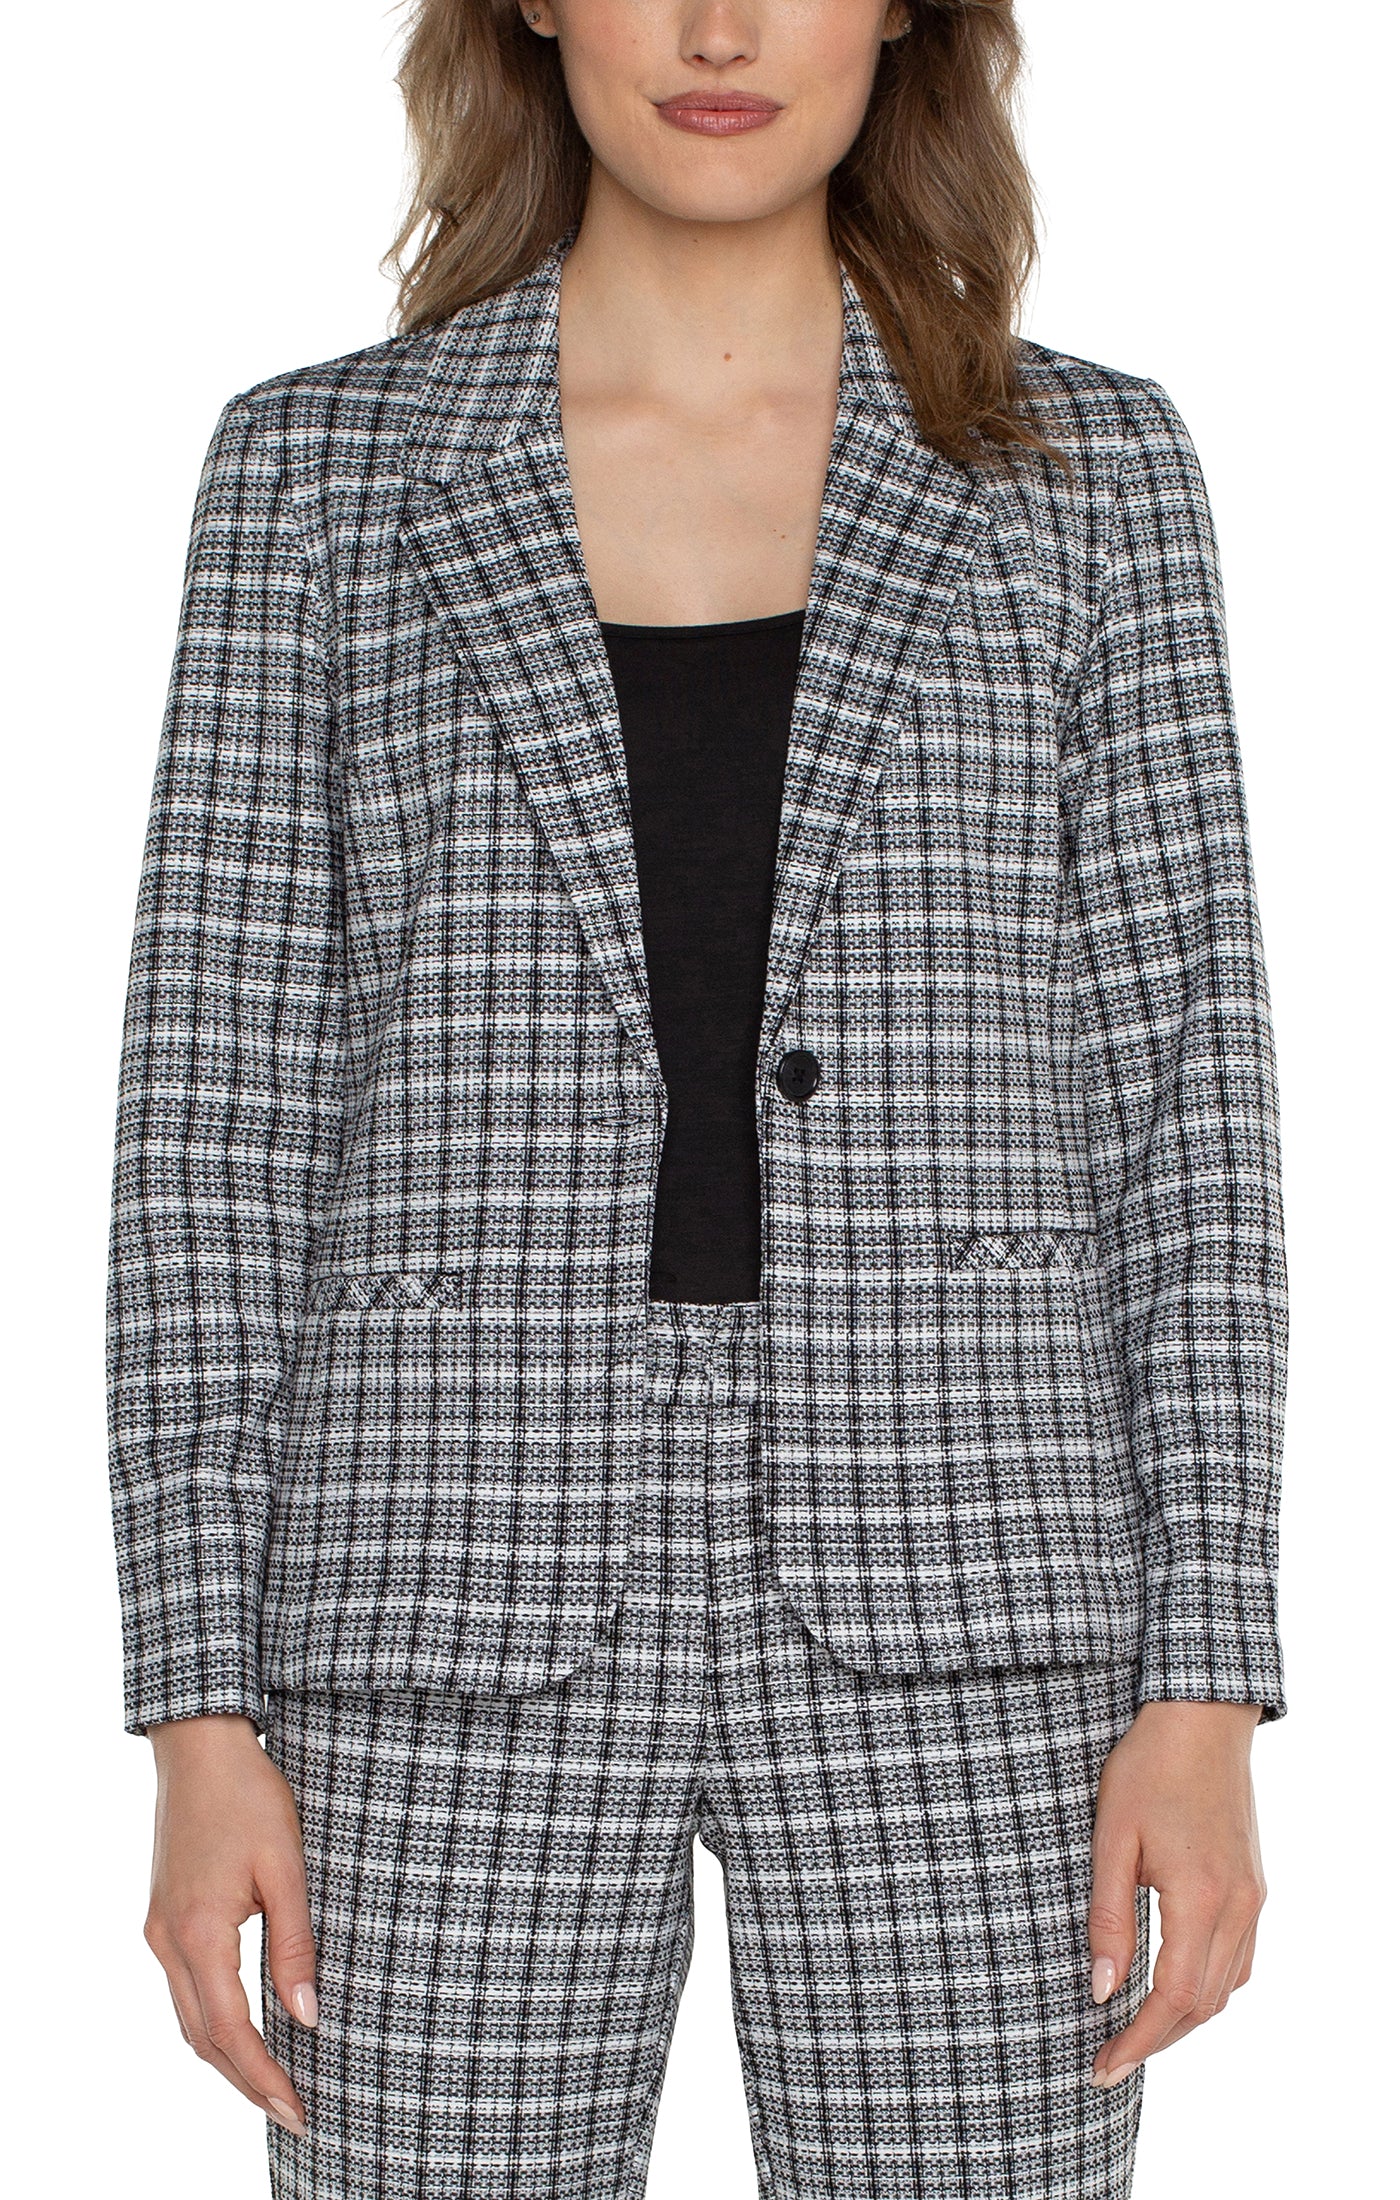 Liverpool Fitted Blazer (Black and White Plaid)